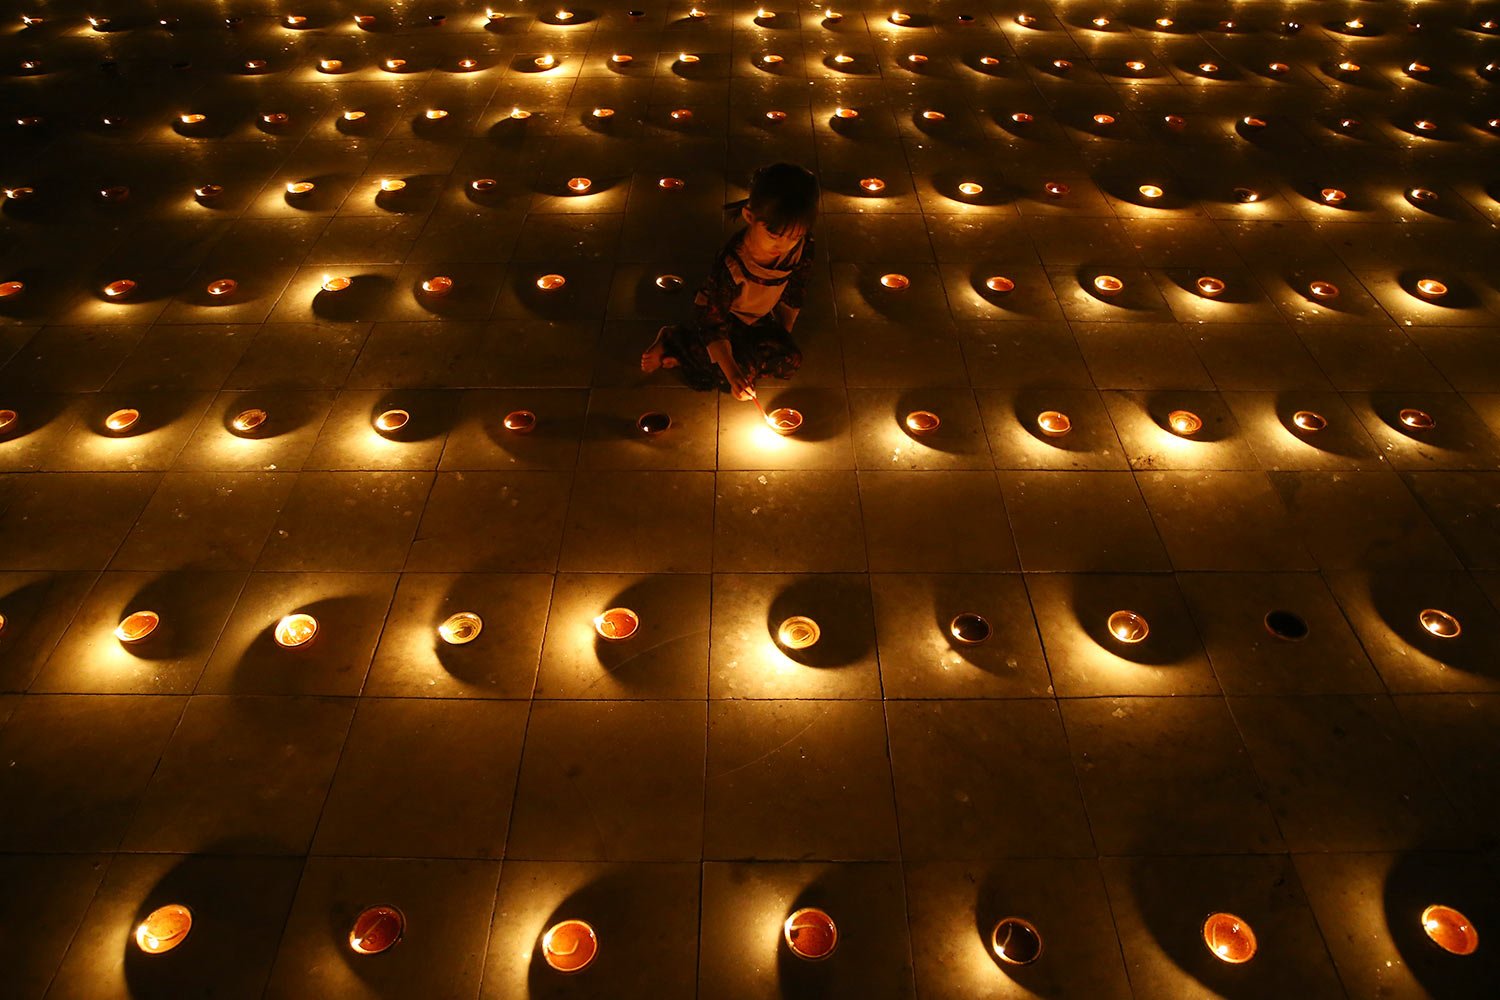  A Buddhist devotee lights oil lamps during celebrations of the full moon day of Thadingyut, or lighting festival, to mark the end of Buddhist Lent, Sunday, Oct. 29, 2023, in Naypyitaw, Myanmar. (AP Photo/Aung Shine Oo) 